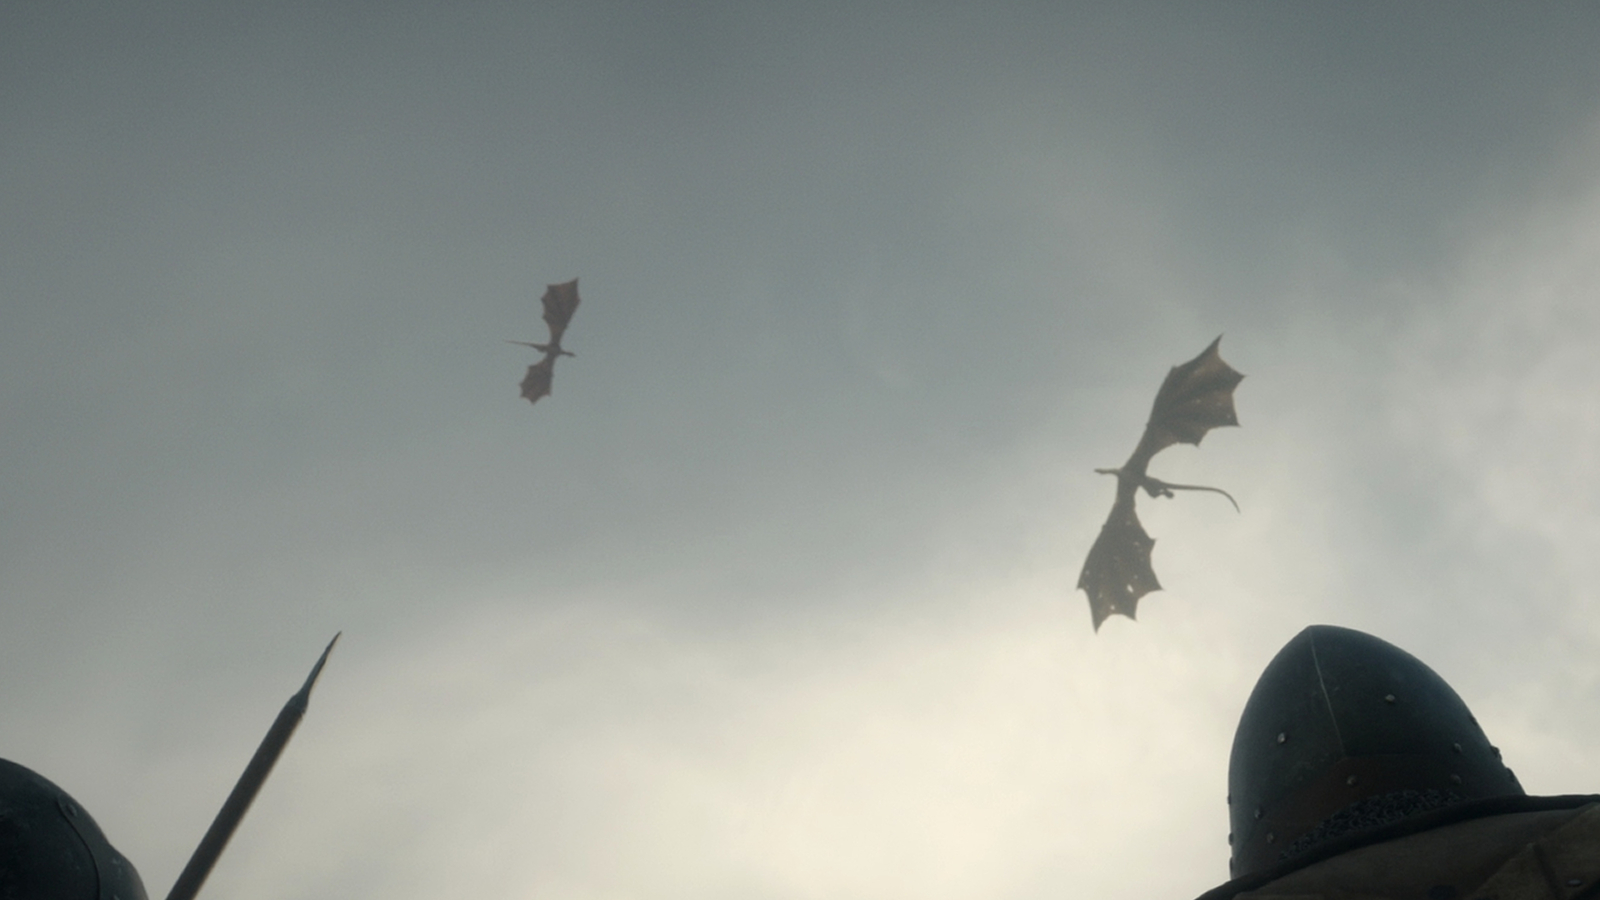 Two soldiers watching dragons fighting in the sky in House of the Dragon Season 2, Episode 4